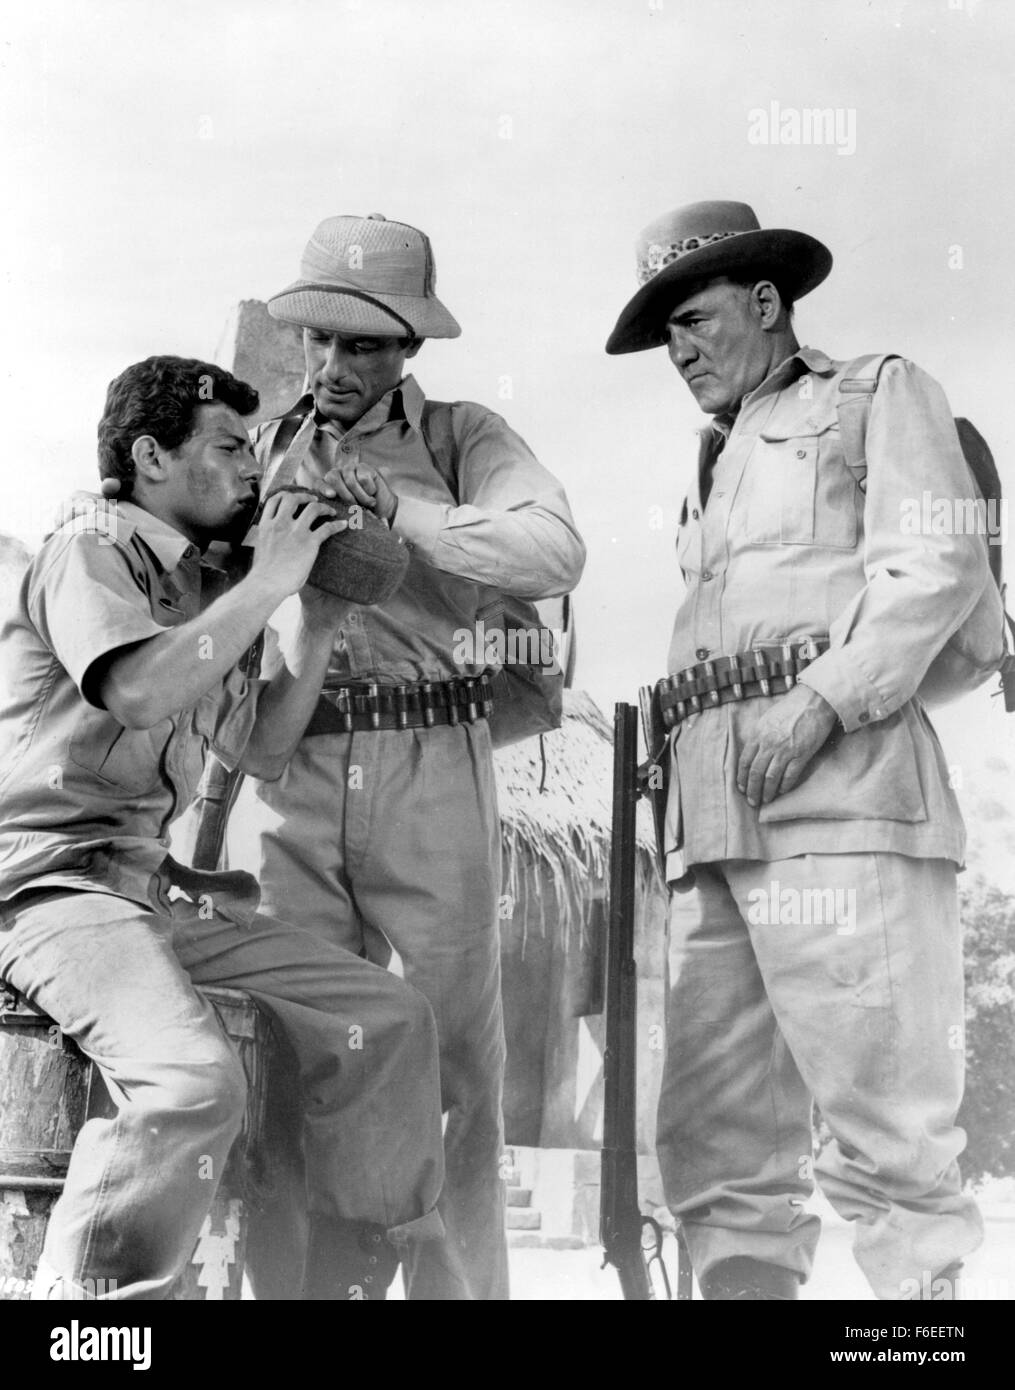 RELEASE DATE: May 15, 1963. MOVIE TITLE: Drums of Africa. STUDIO: Metro-Goldwyn-Mayer (MGM). PLOT: . PICTURED: FRANKIE AVALON as Brian Ferrers and LLOYD BOCHNER as David Moore. Stock Photo